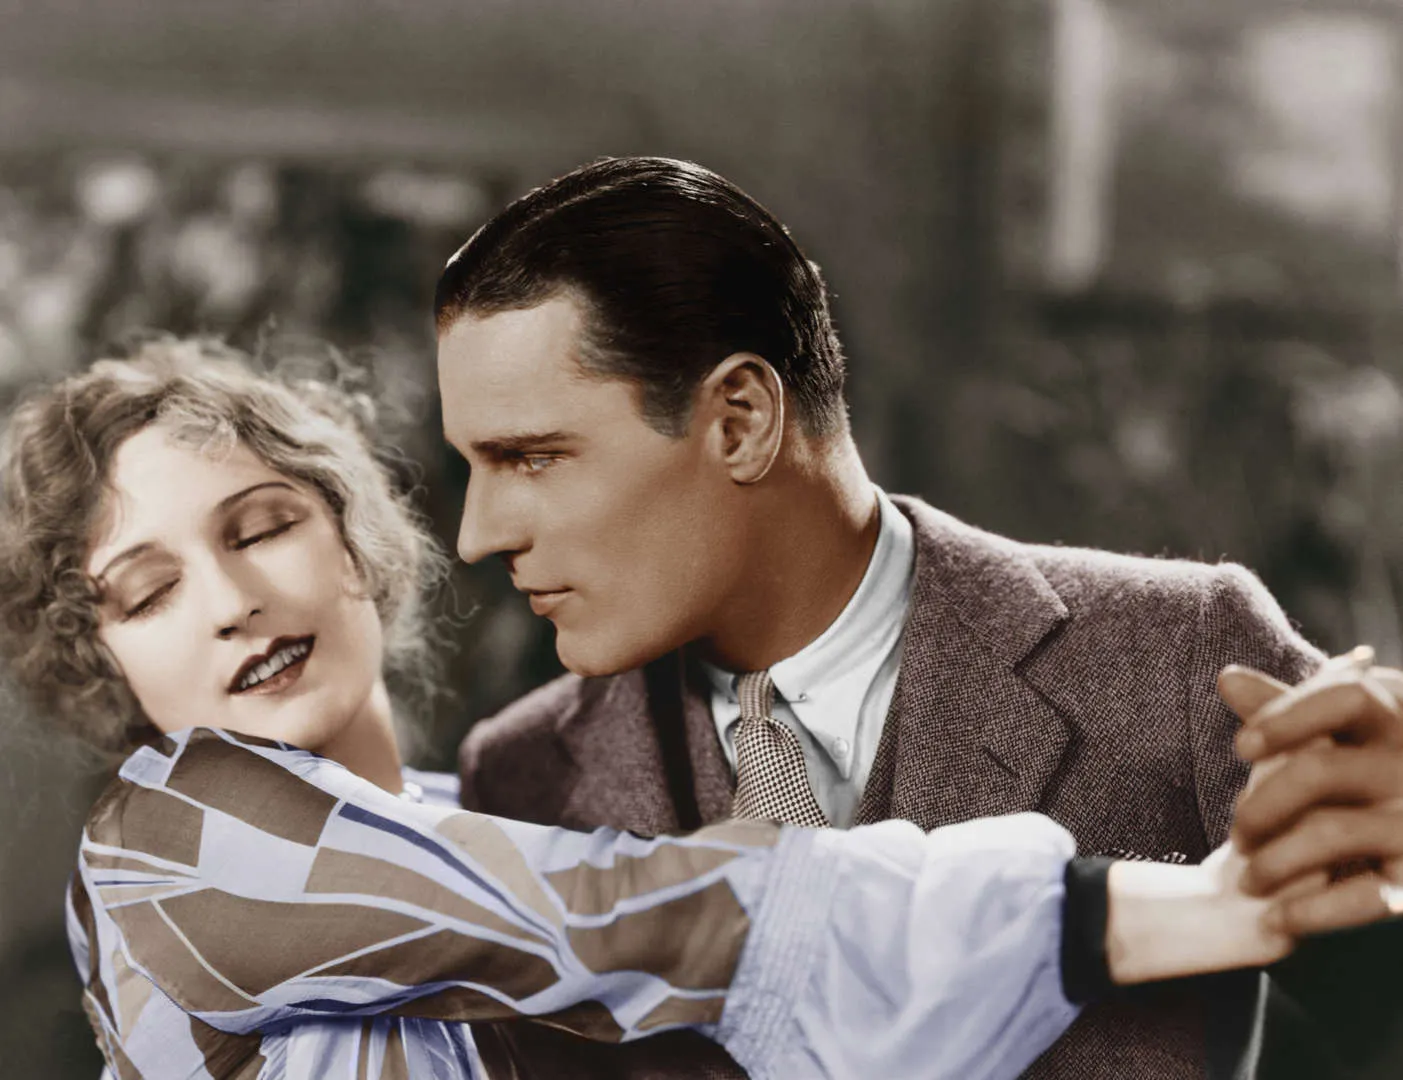 You won't believe these dating rules from the early 20th century